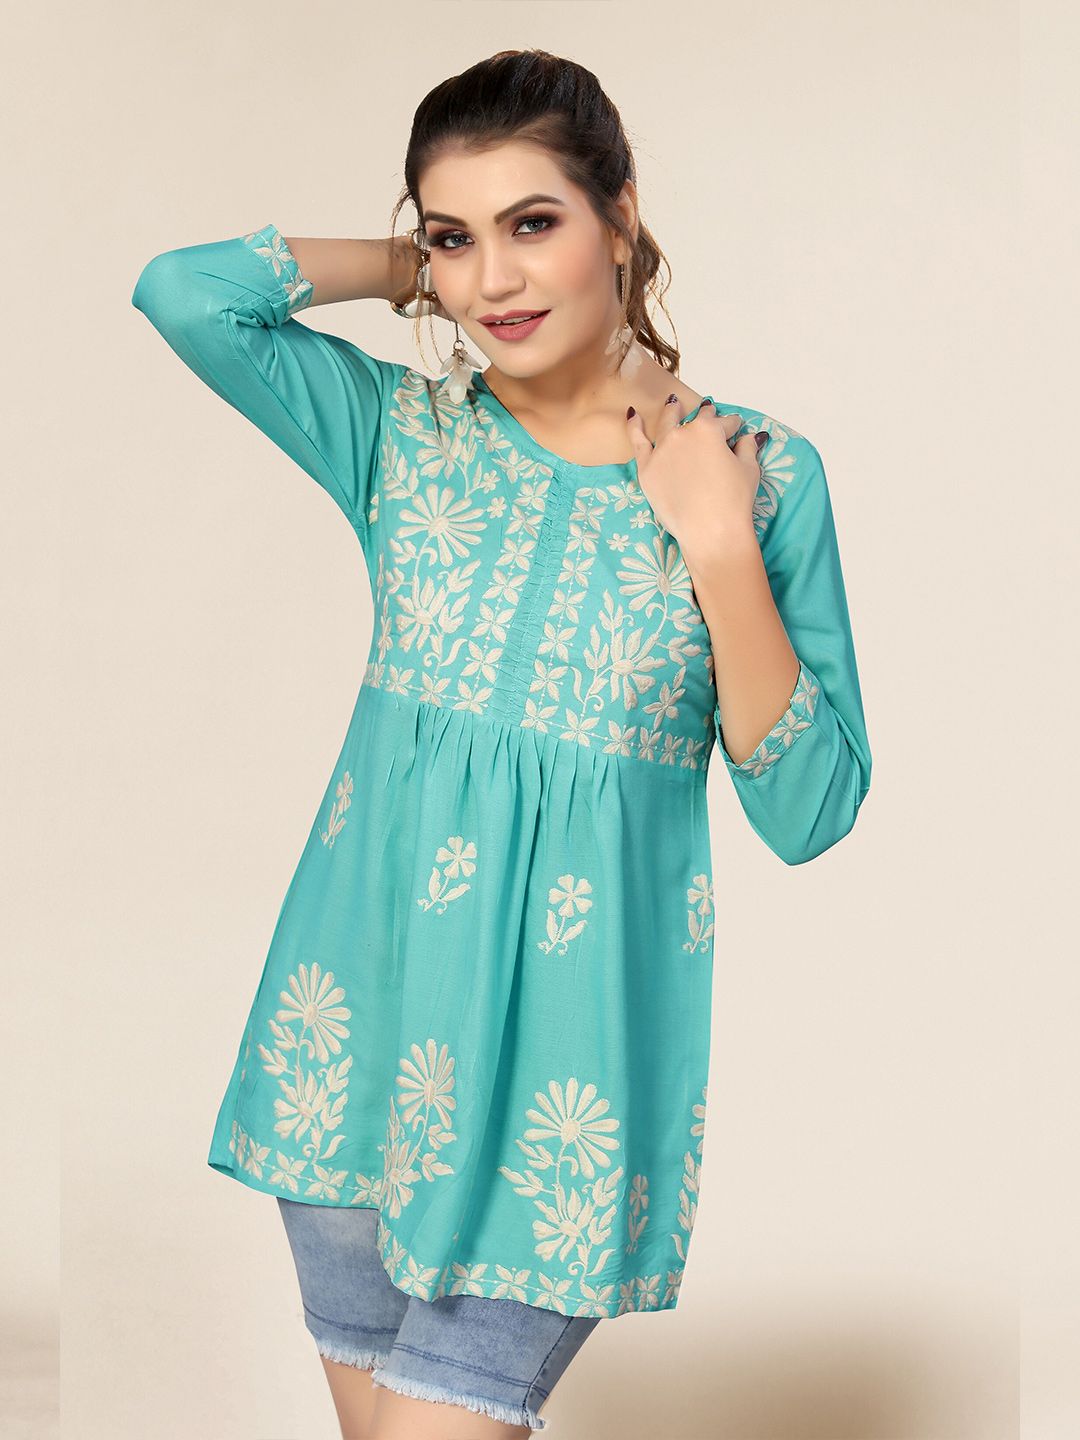 Winza Designer Turquoise Blue Floral Print Top Price in India